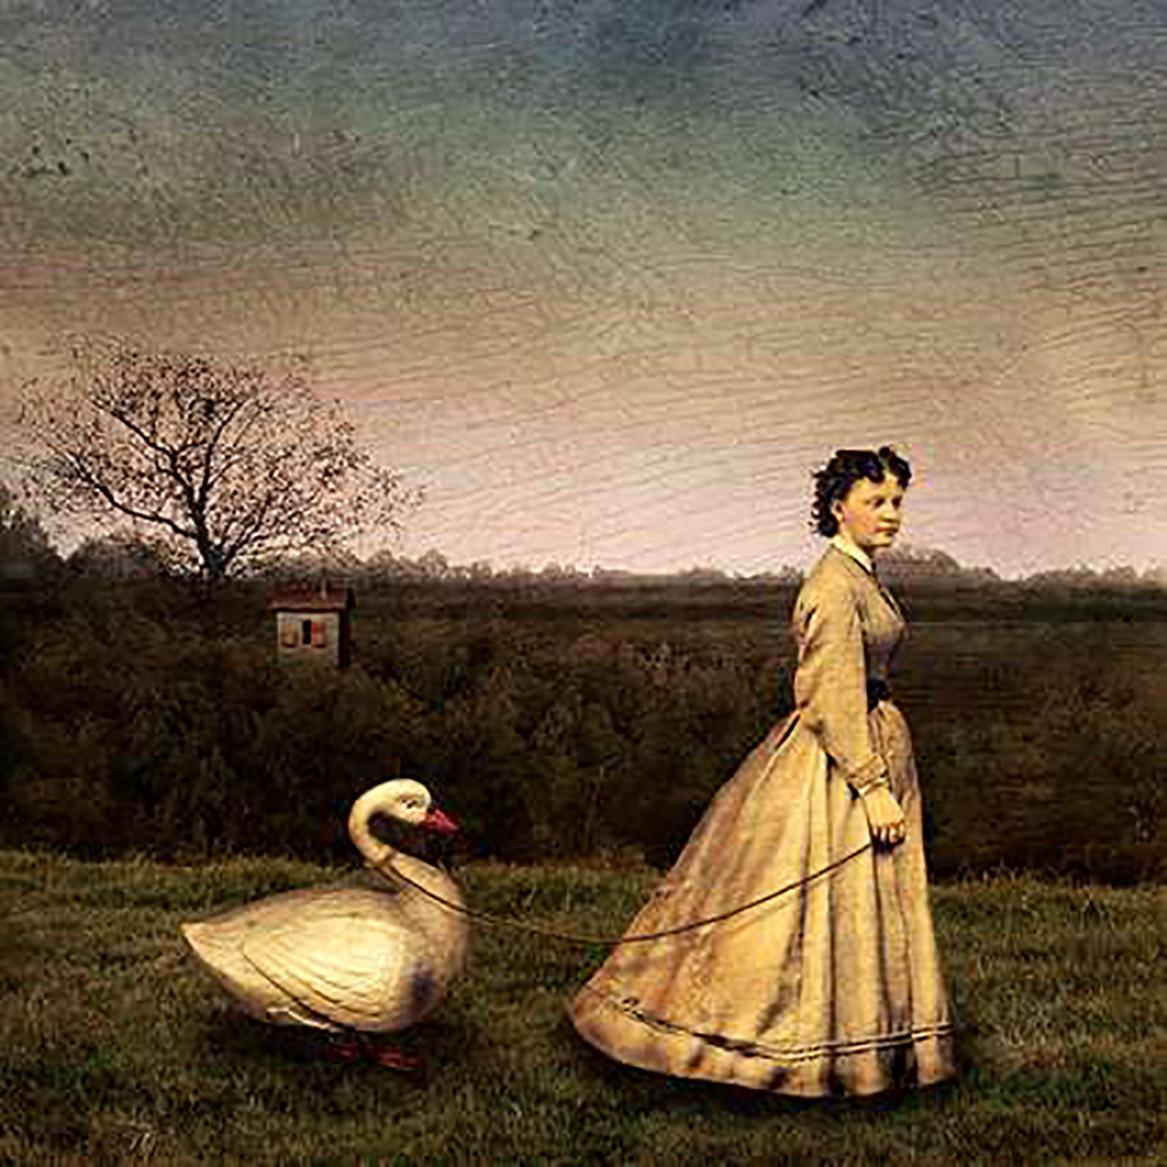 Maggie Taylor, Woman with Swan, 2002, Image Size: 15 x 15", Framed 24 x 24". Archival pigment ink print, edition of 15. 